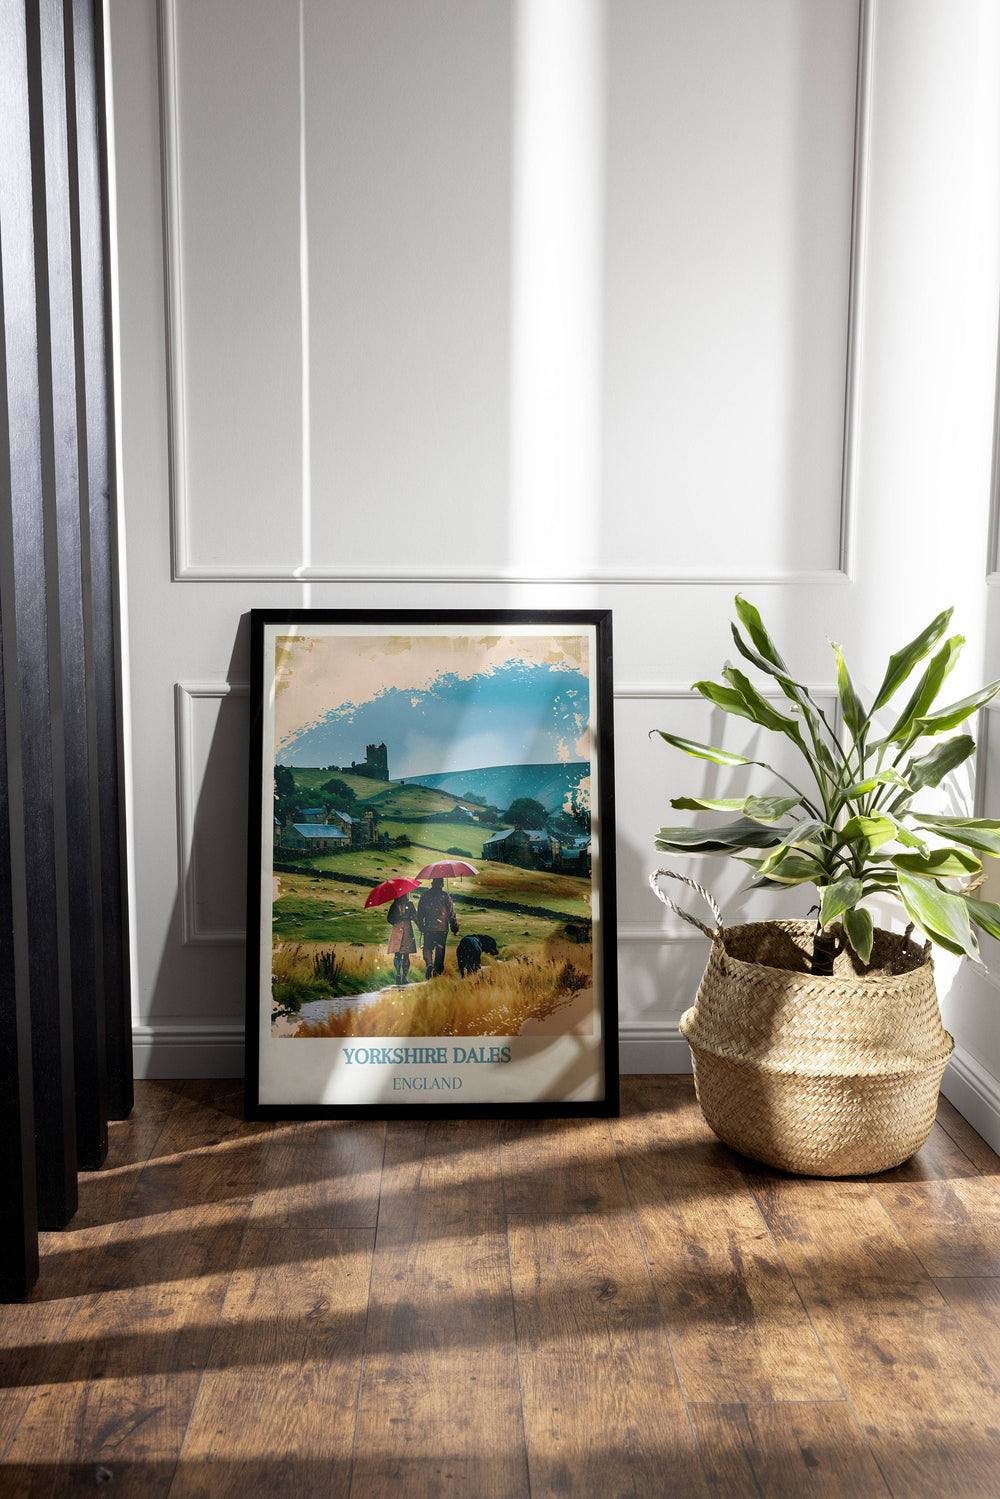 Elevate Your Décor with Dales Art Gift: Yorkshire Dales Print, an Exquisite UK Housewarming Gift Choice.